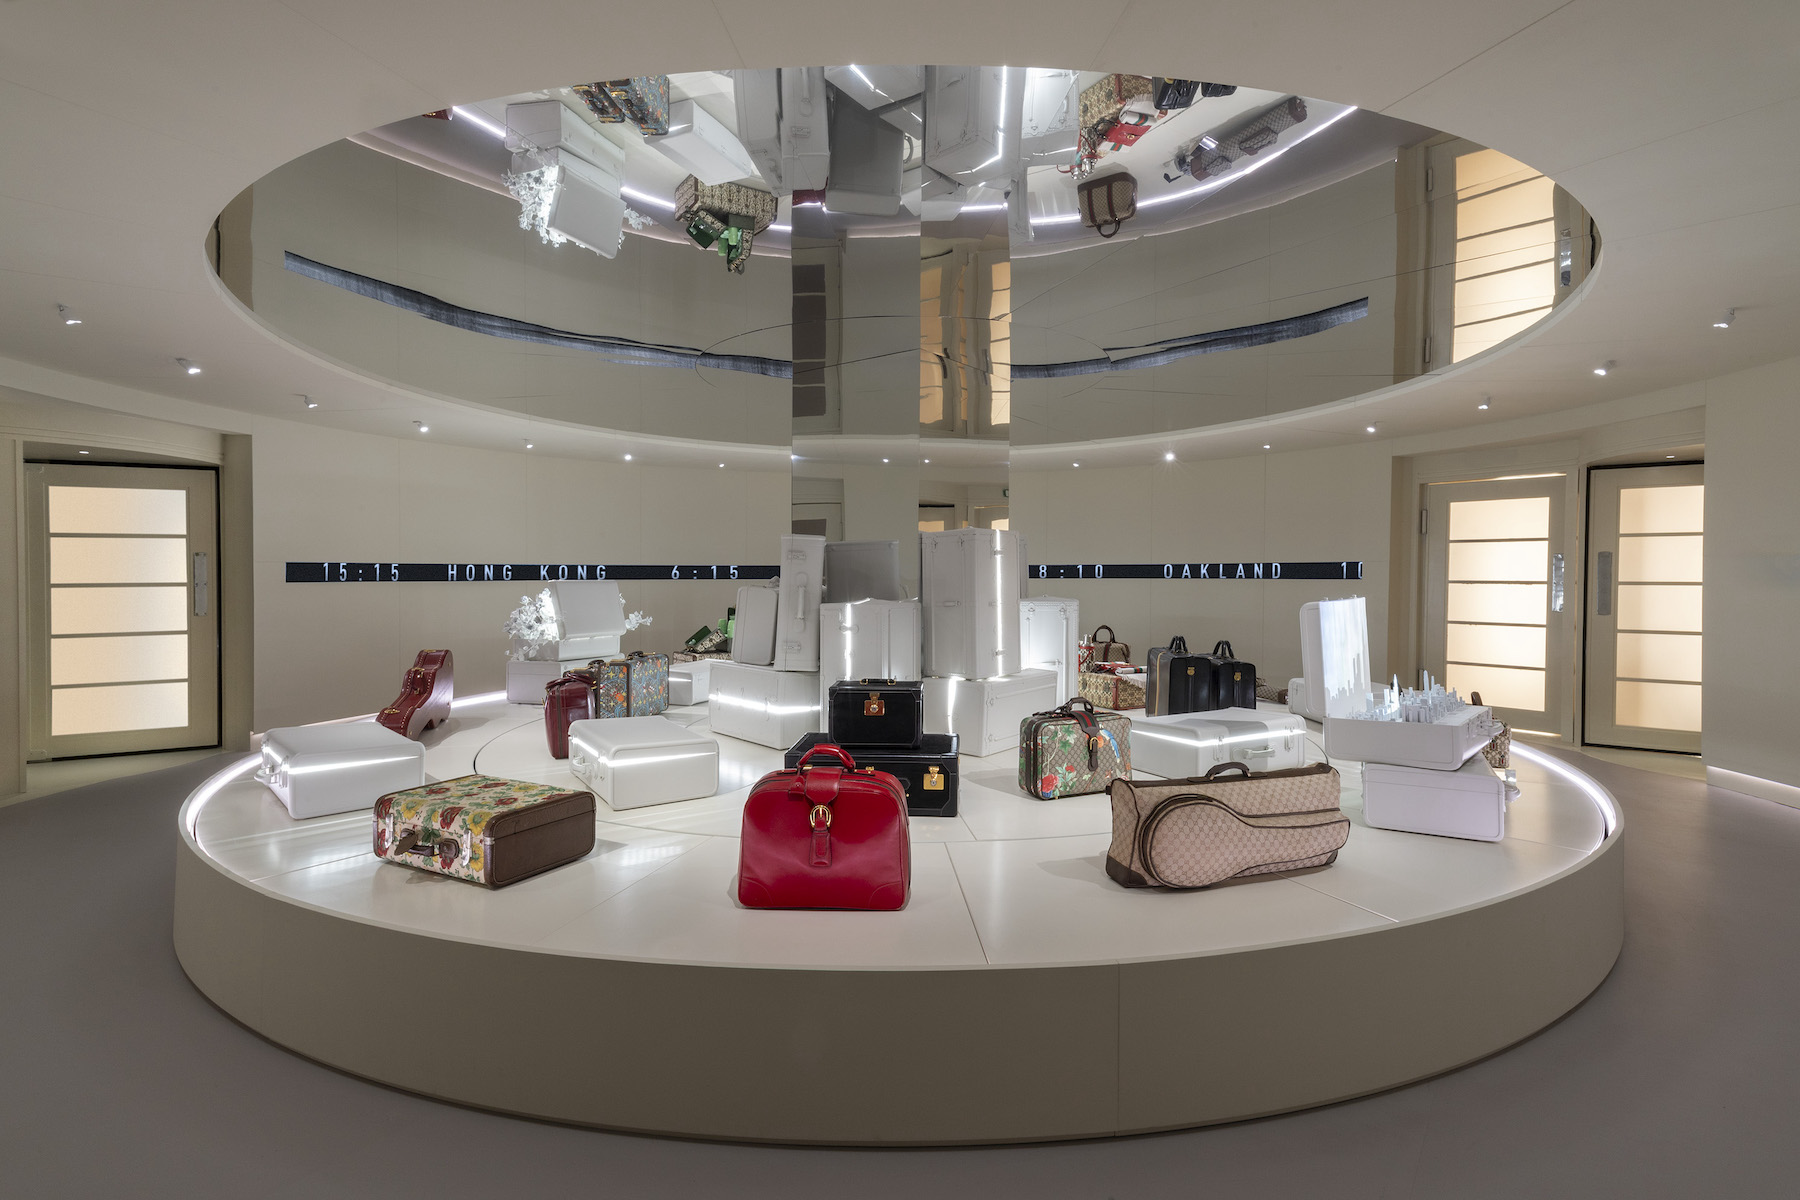 Gucci Cosmos marks the first time the House's most iconic archival